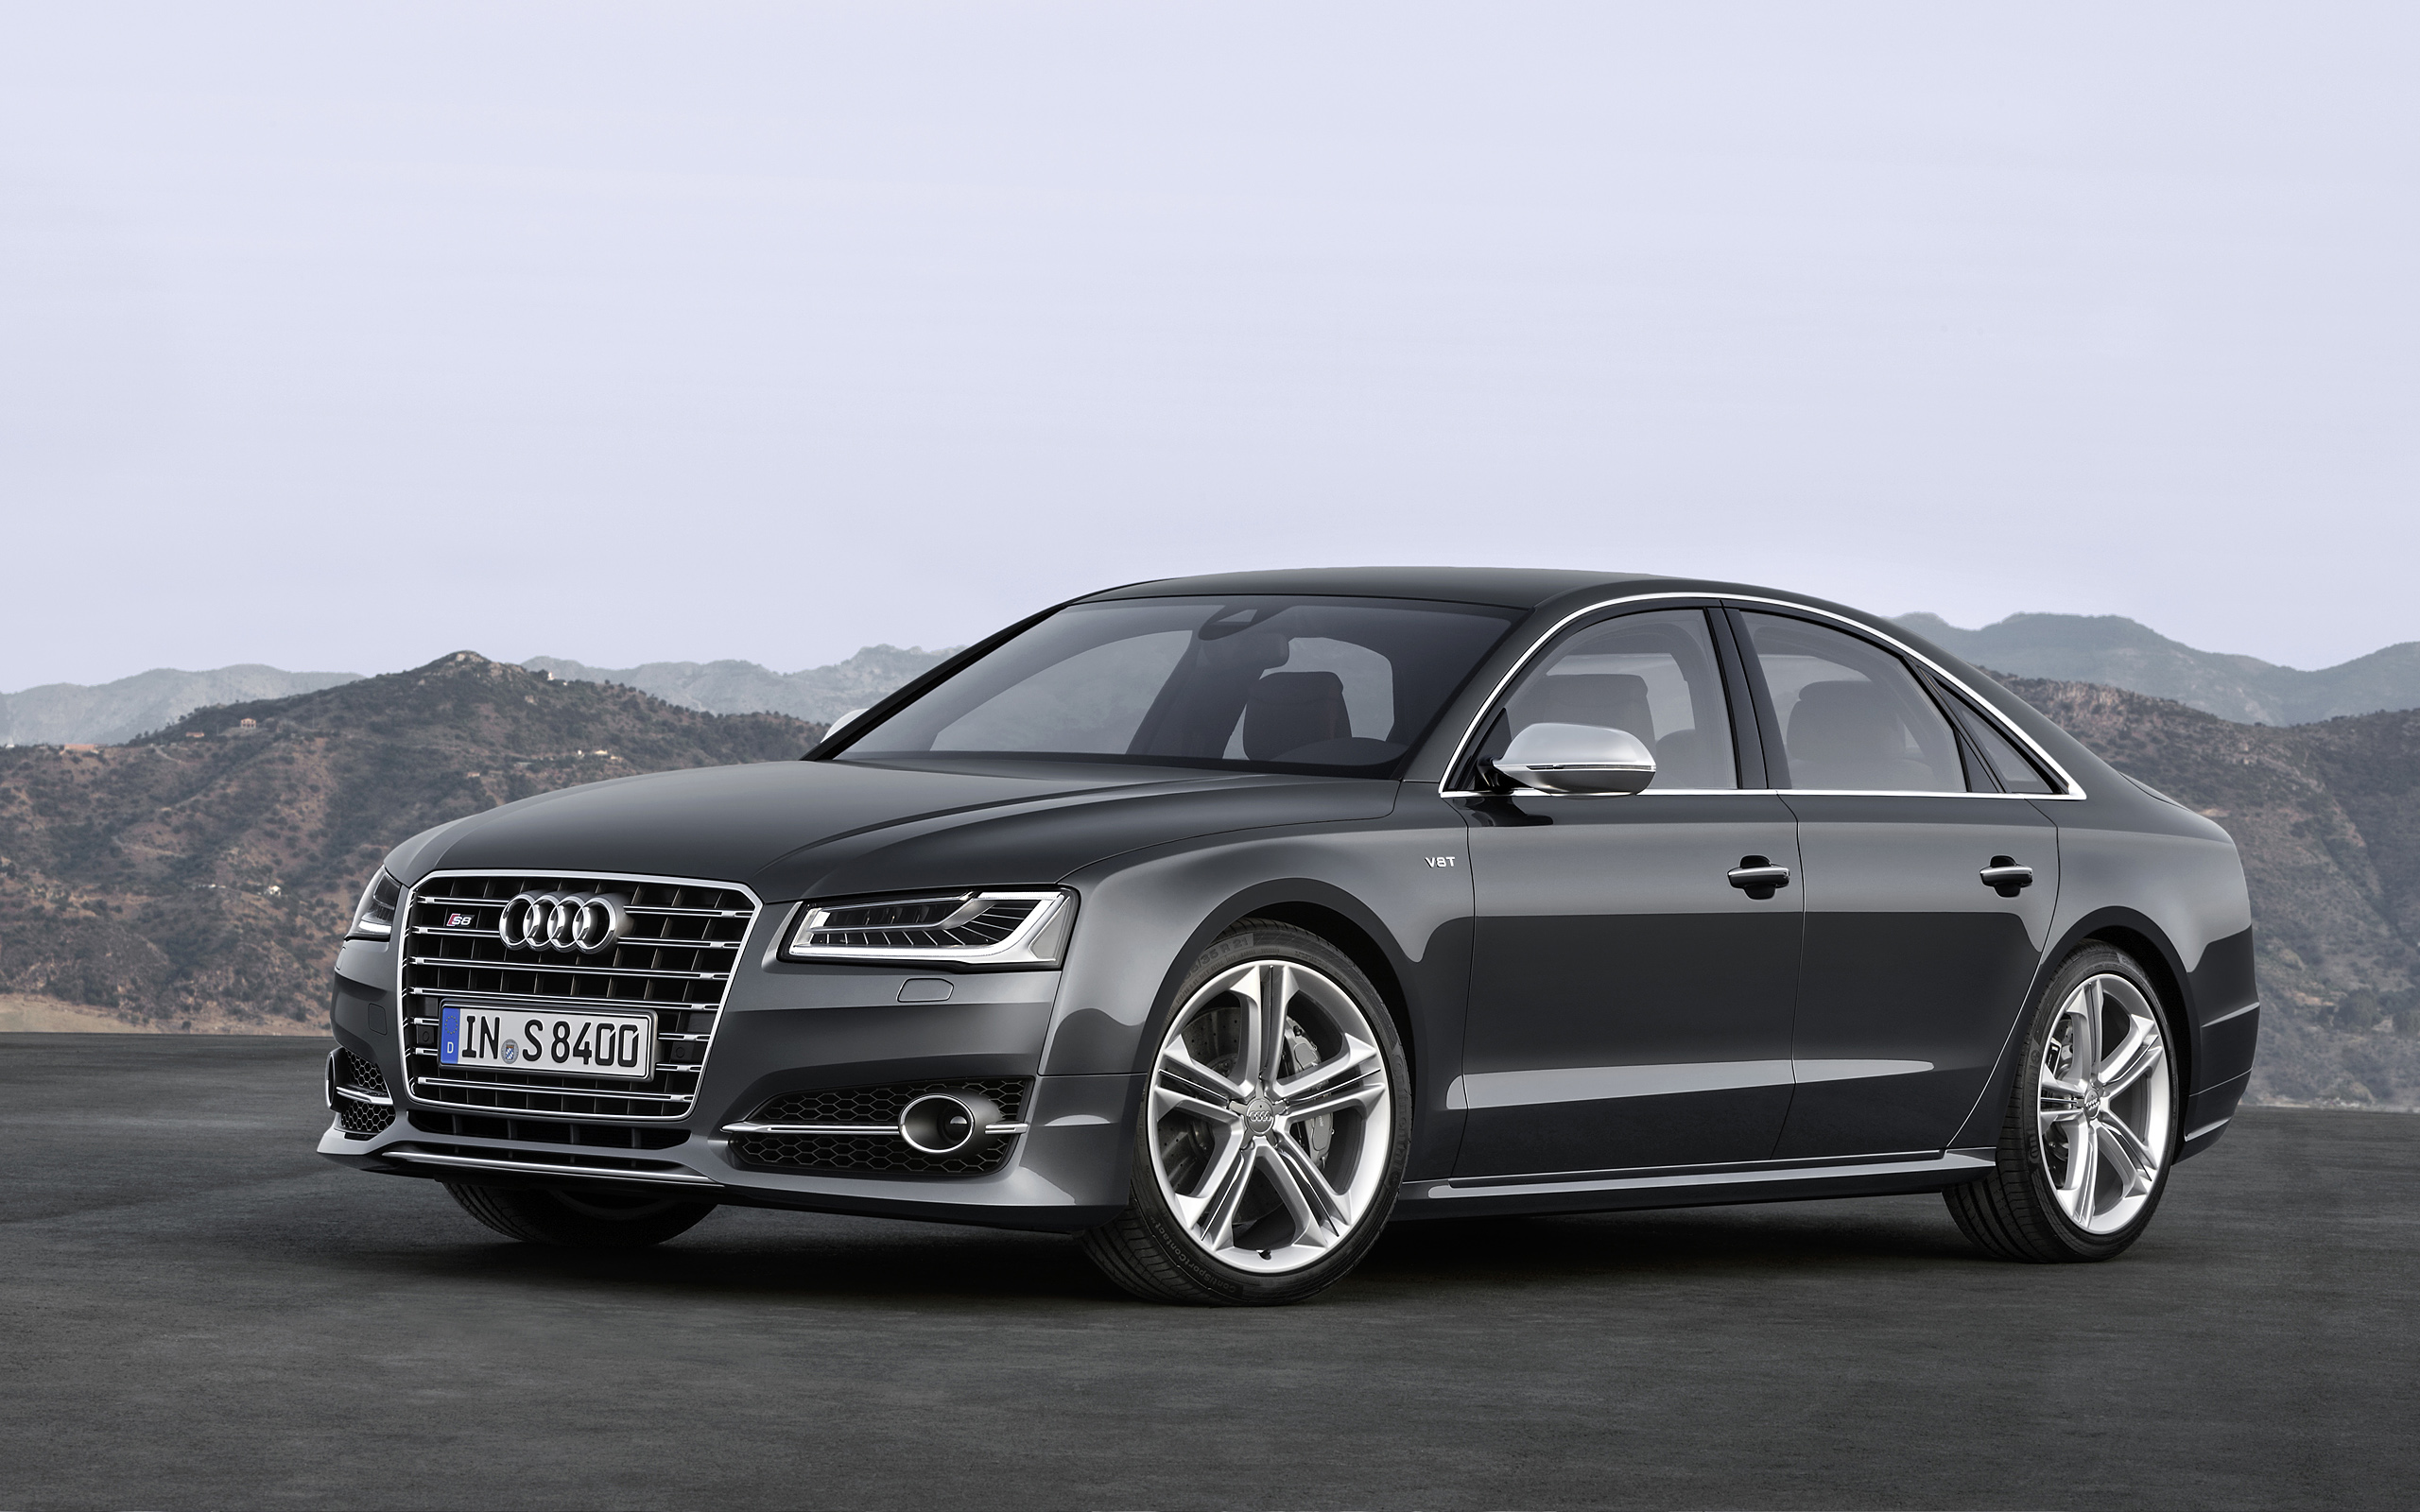 2015 Audi A8 HD Wallpapers Backgrounds